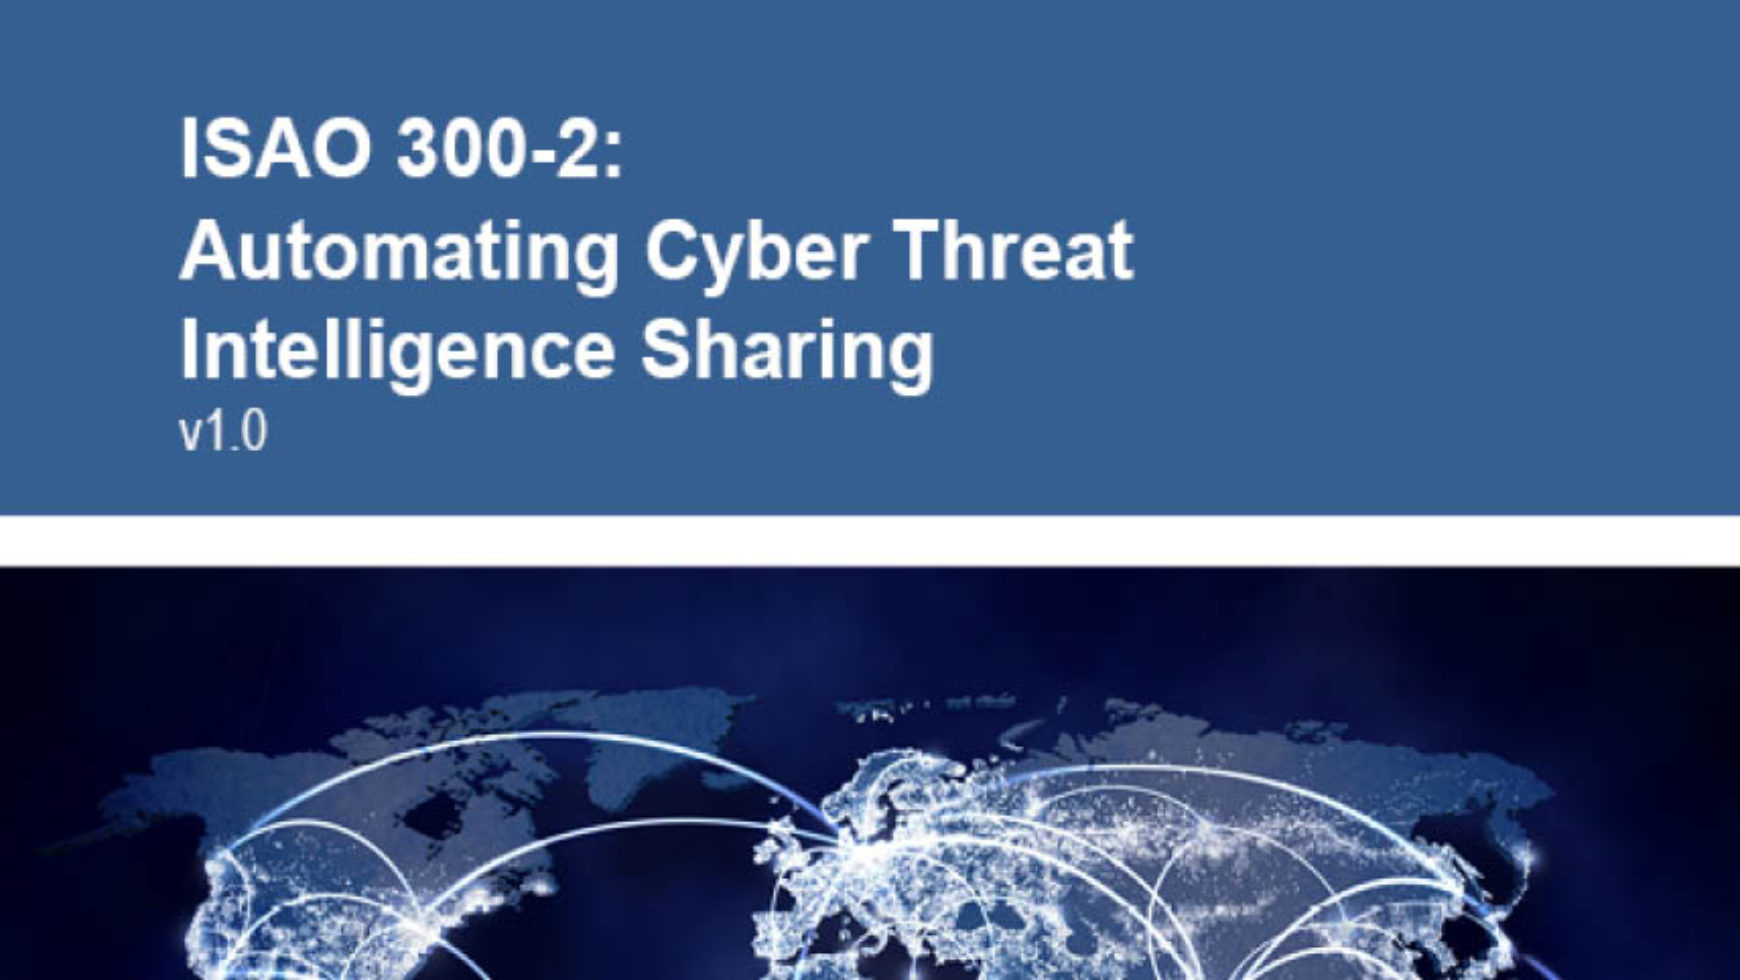 ISAO Standards Organization Announces New Publication ISAO 300-2: Automated Cyber Threat Intelligence Sharing